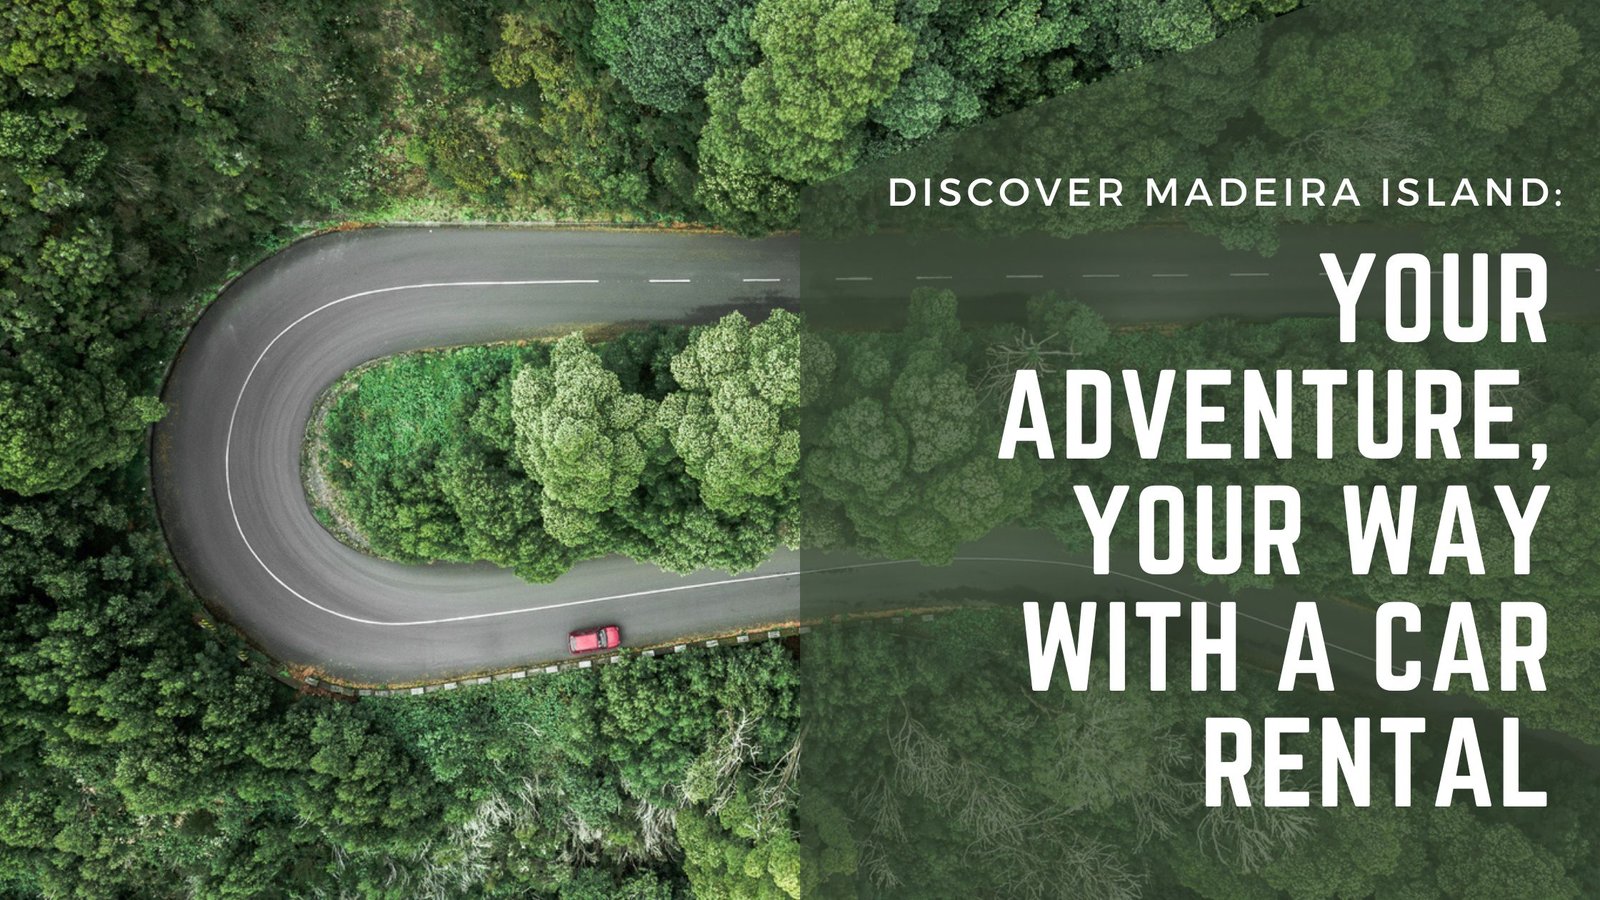 Discover Madeira Island: Your Adventure, Your Way with a Car Rental